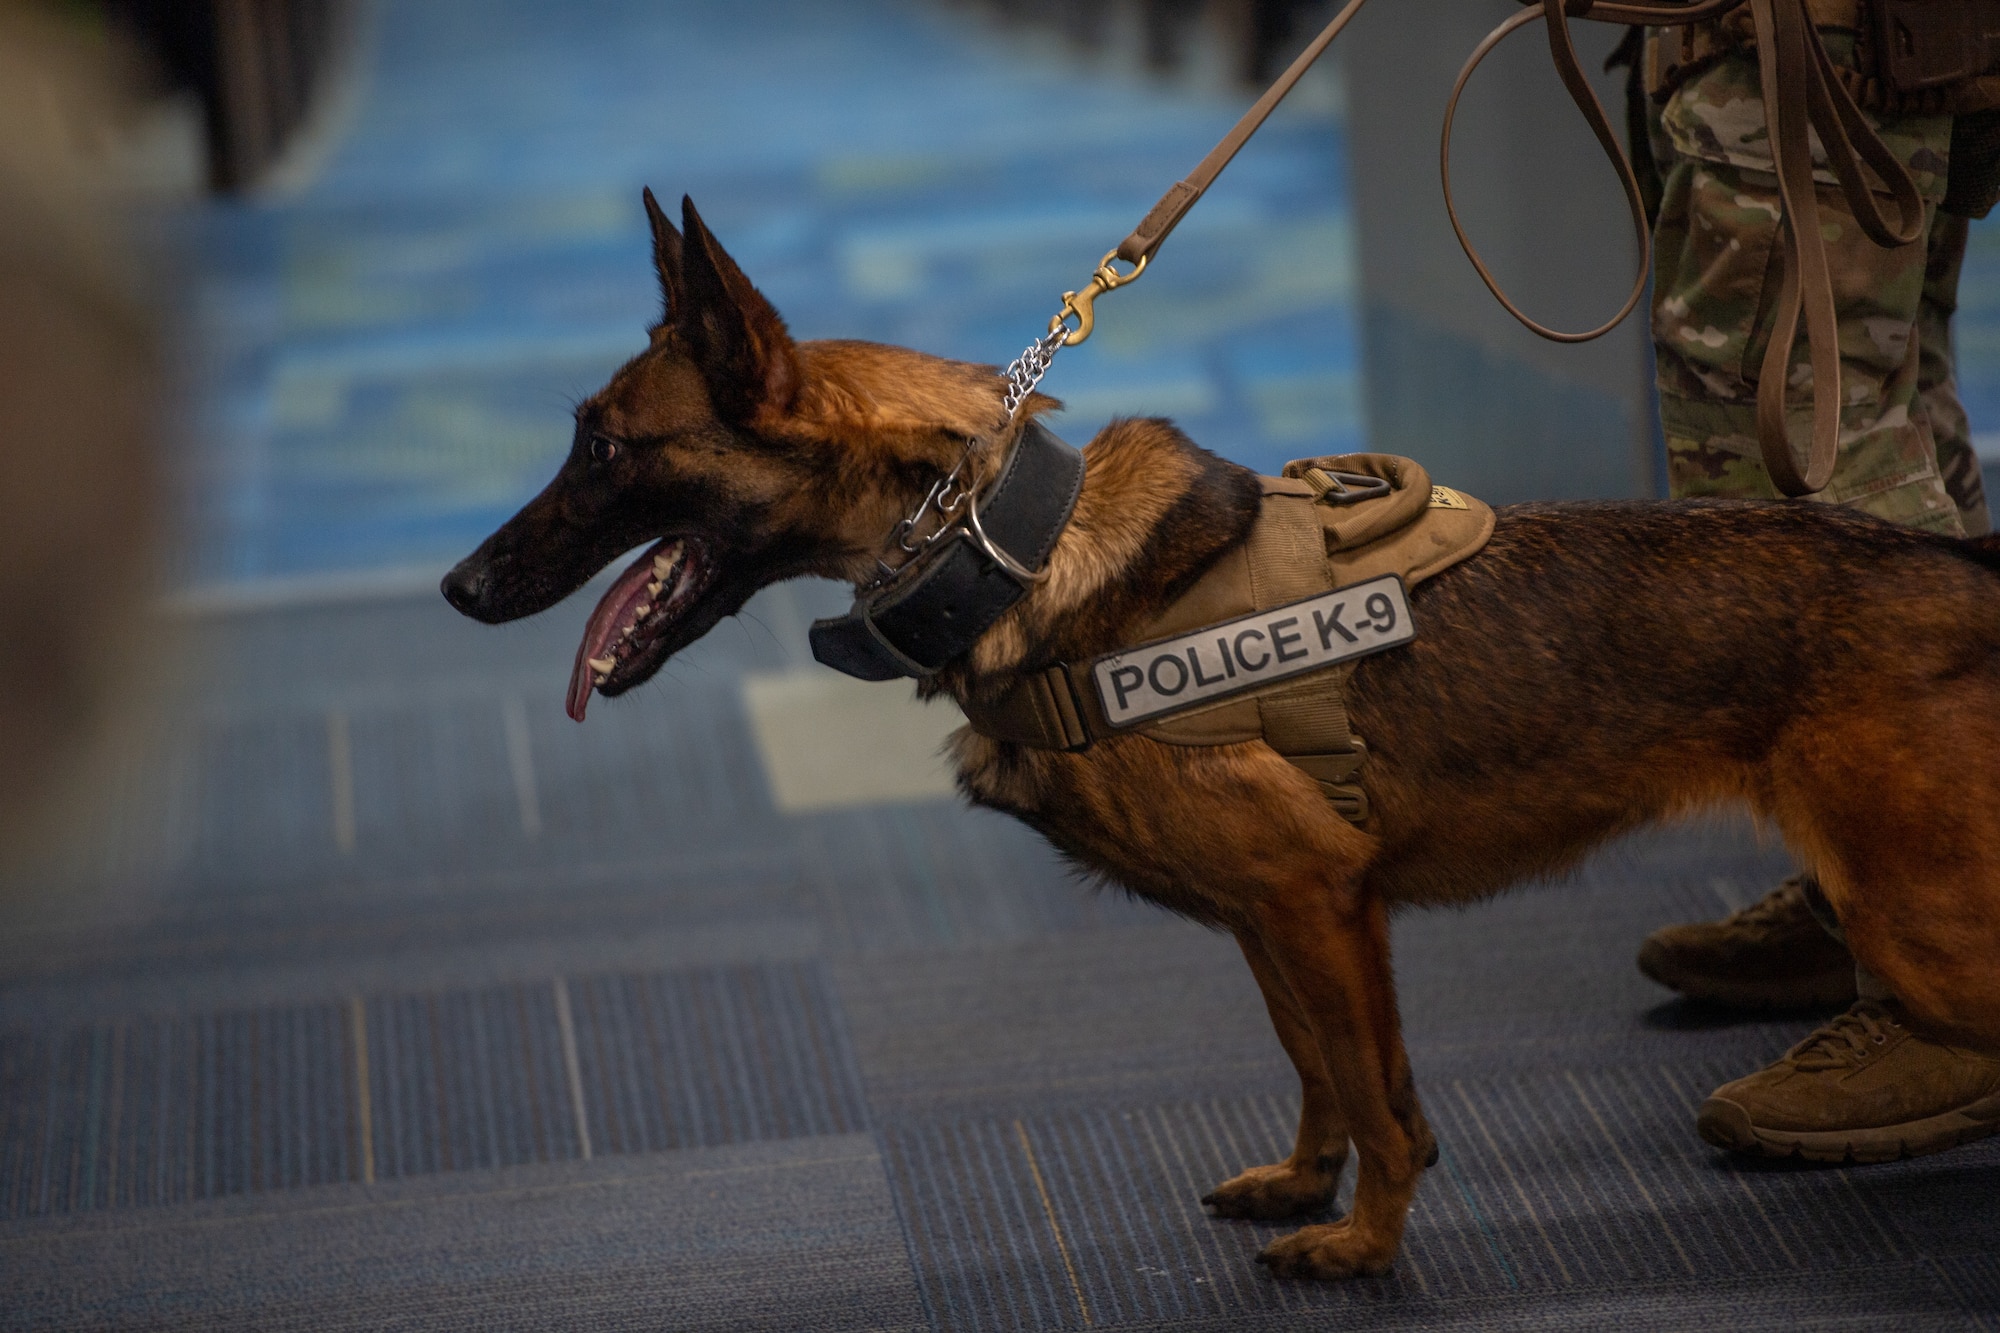 MWD sniffs out explosives for certification